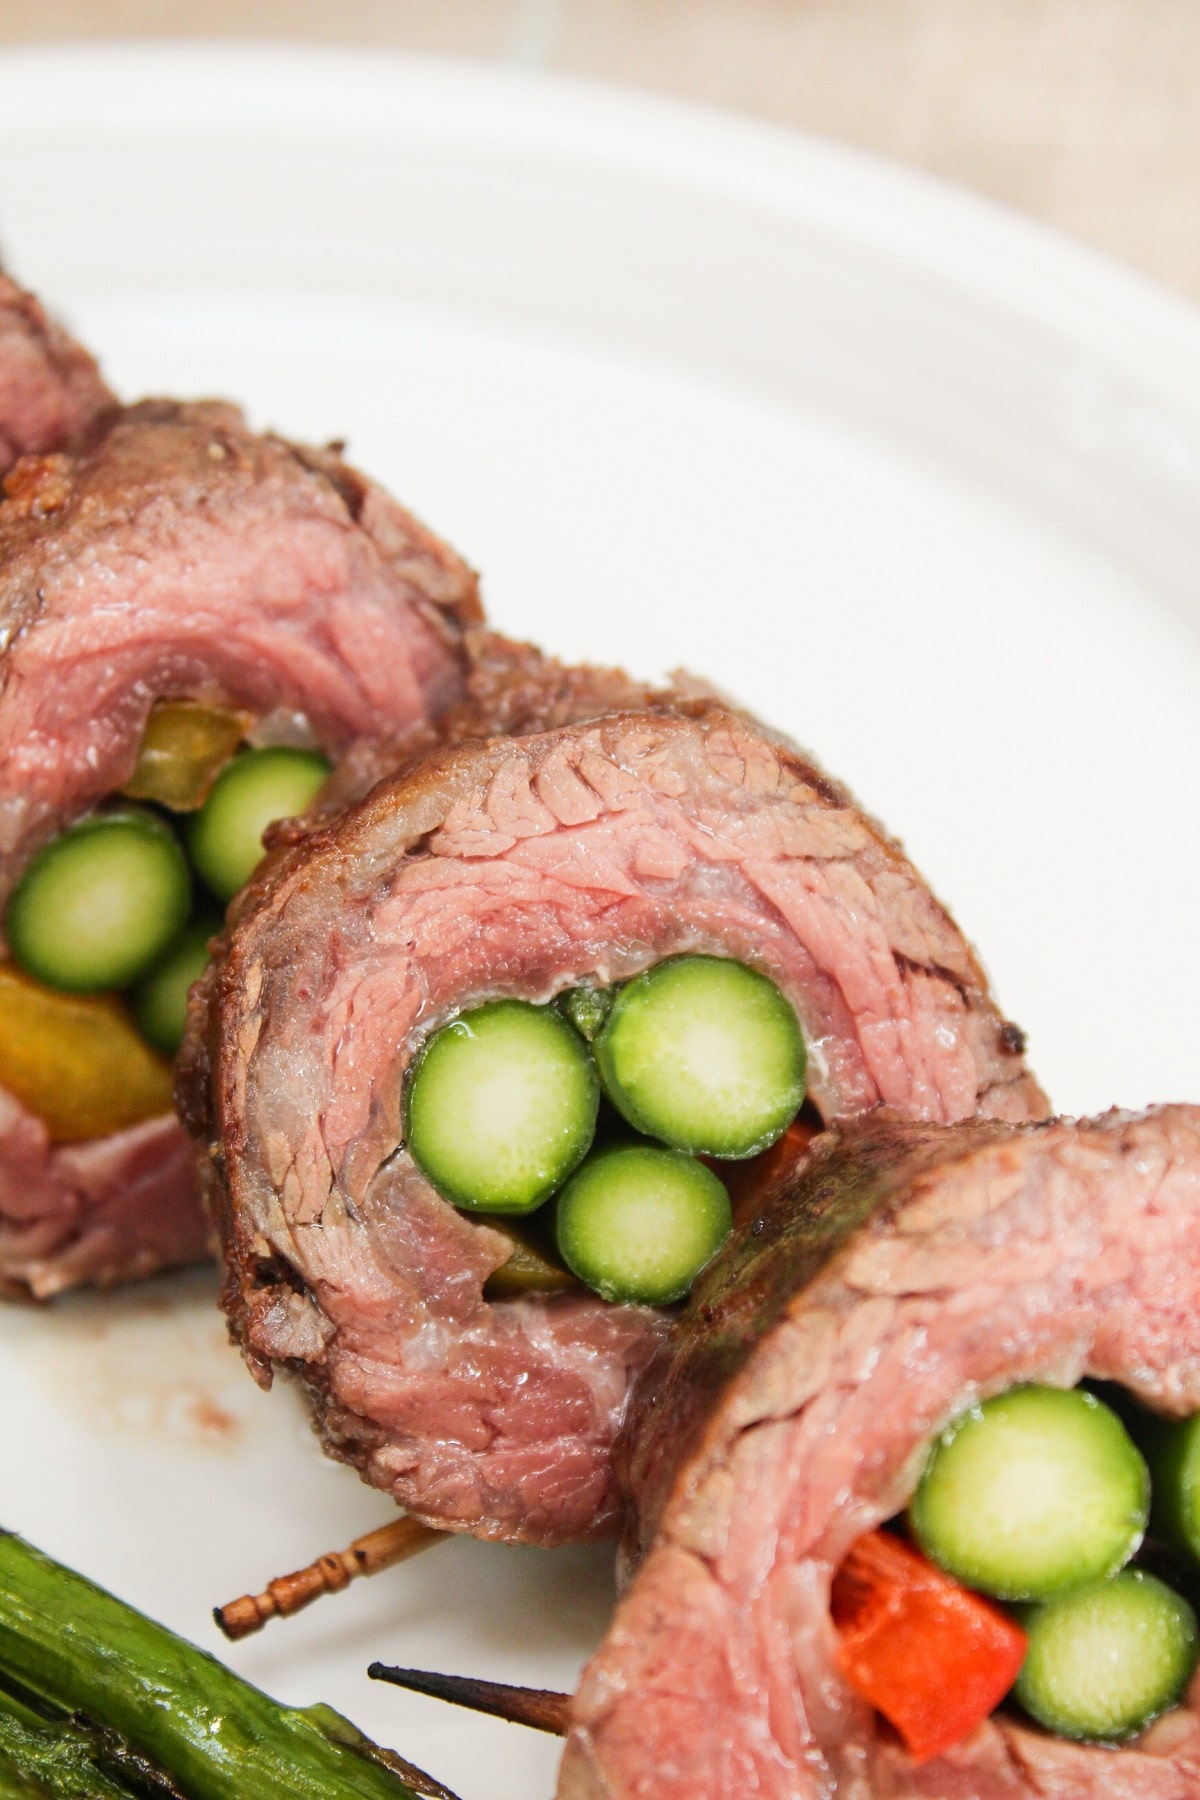 steak and asparagus roll-ups sliced on a plate